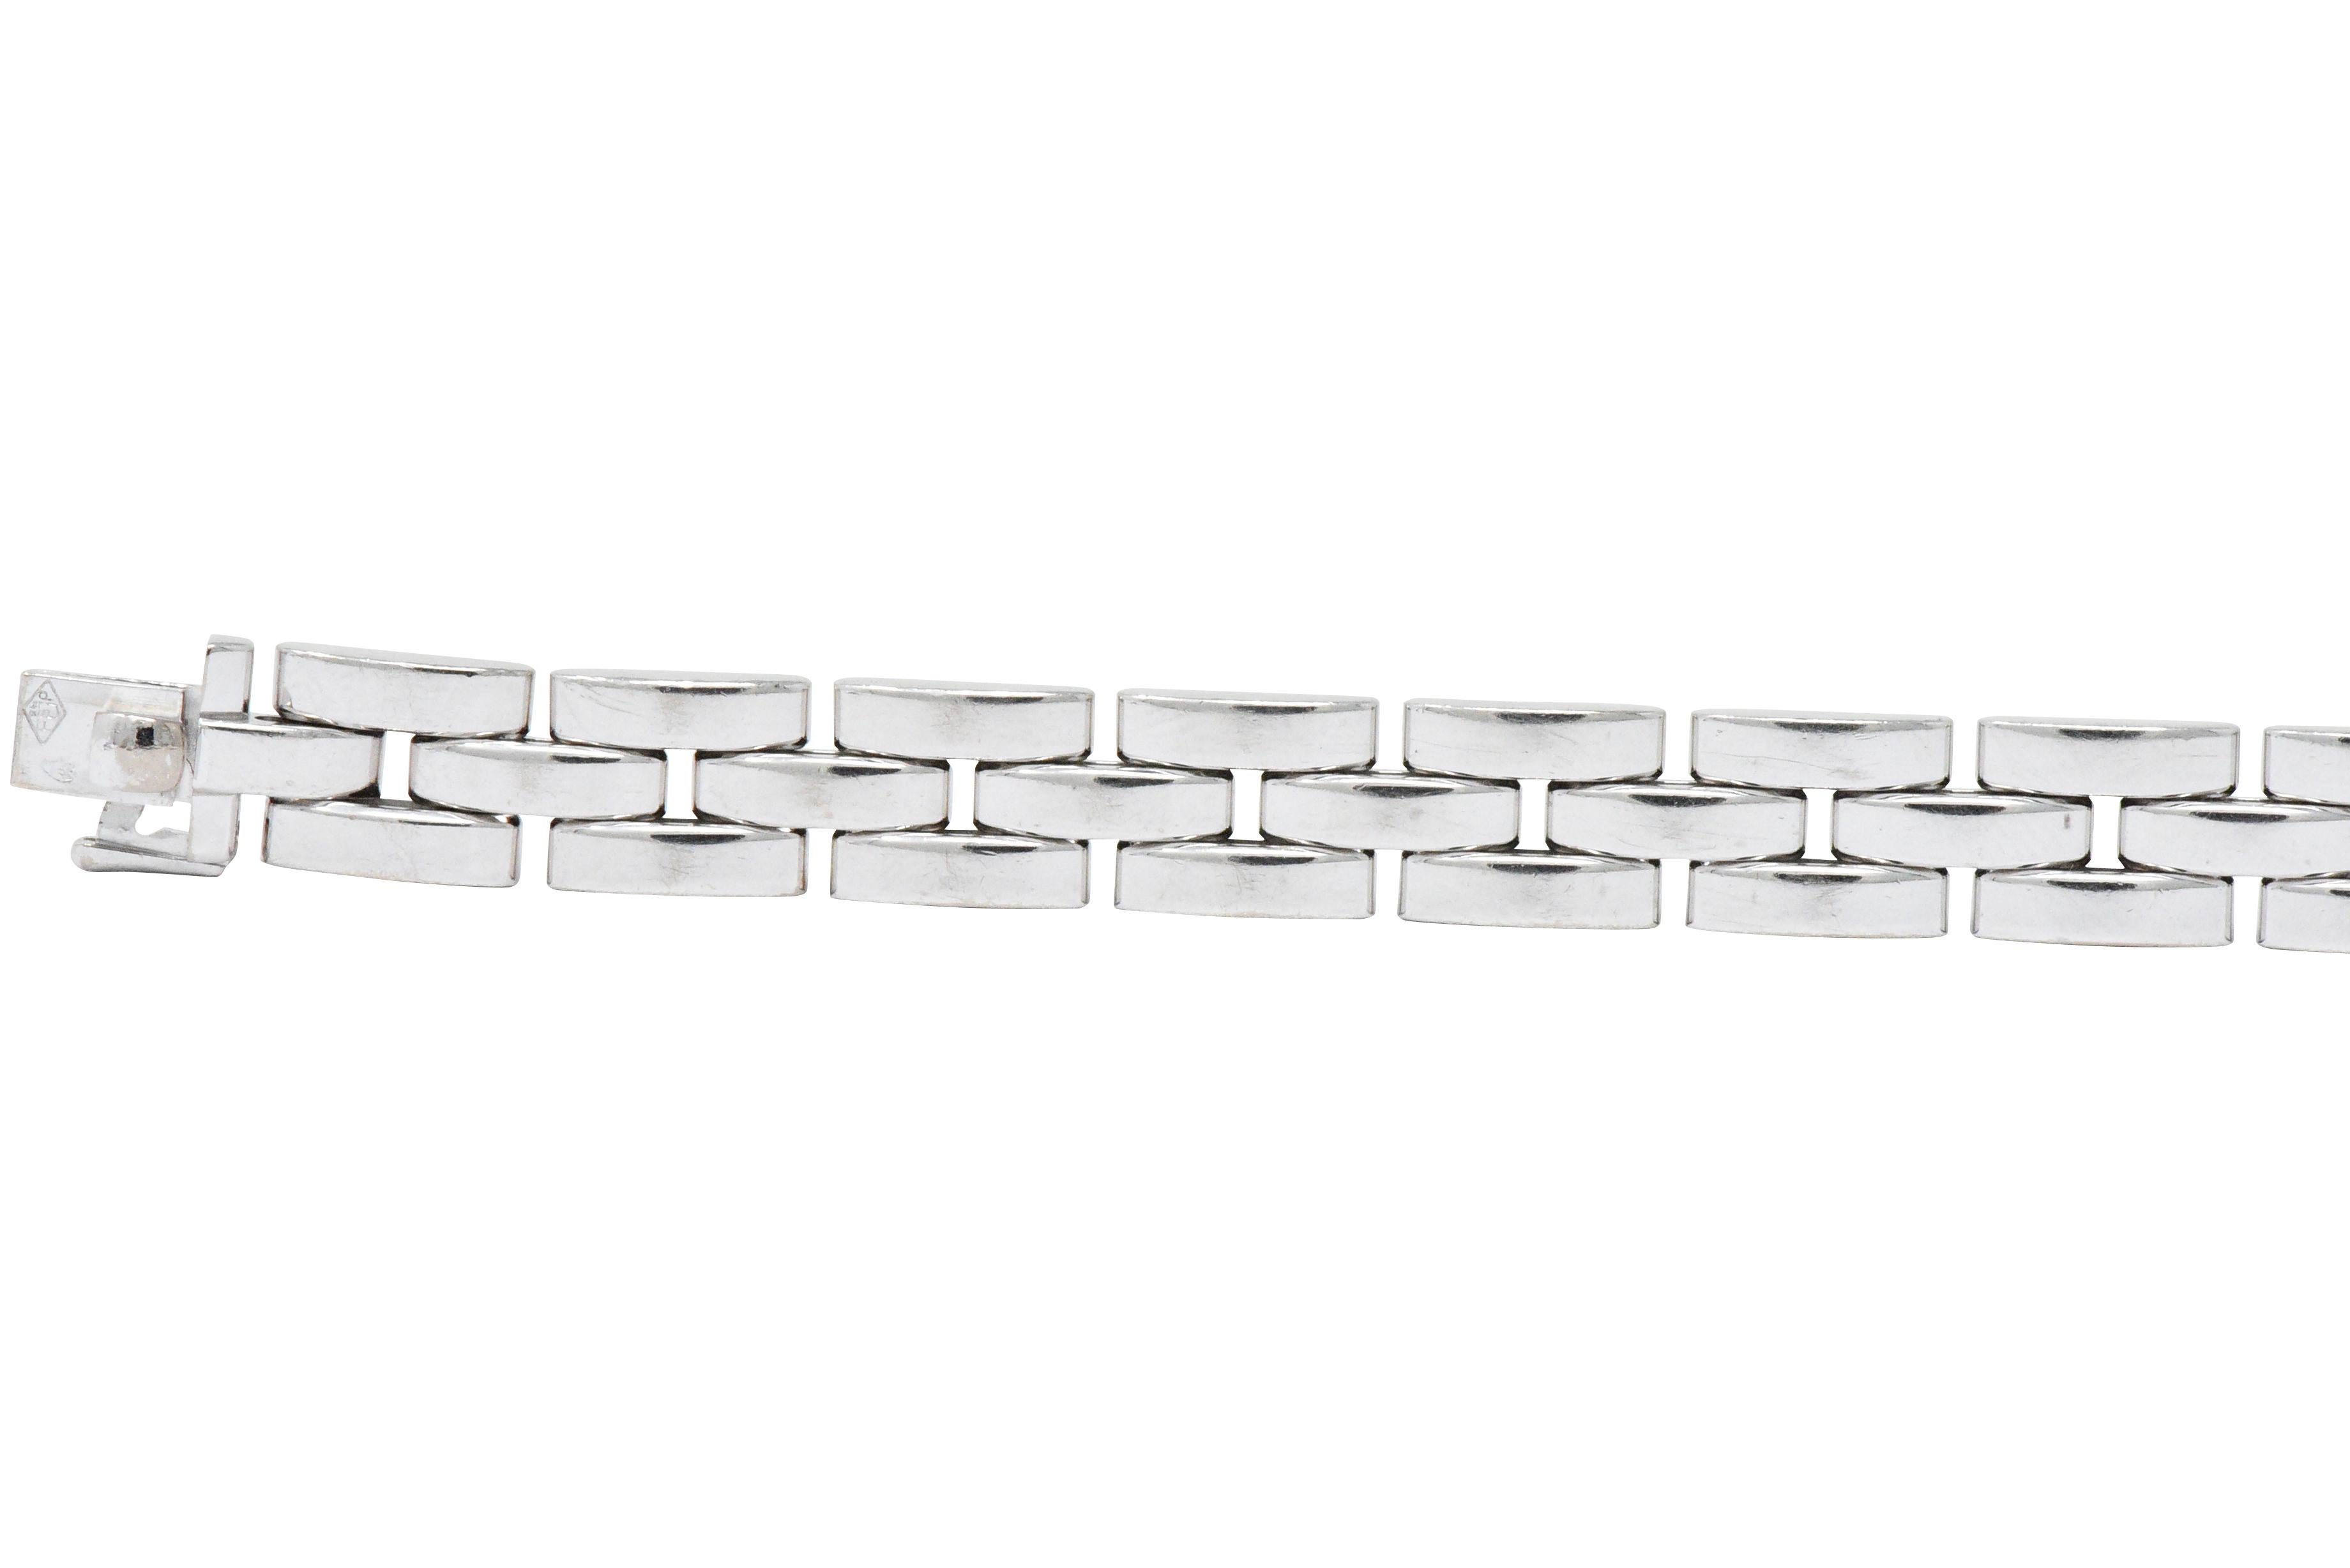 Link style bracelet comprised of rectangular cushion links

With a bright polished finish

Completed by concealed clasp and safety

Part of the Maillon Panthere collection

Numbered and fully signed Cartier

French assay marks for 18 karat